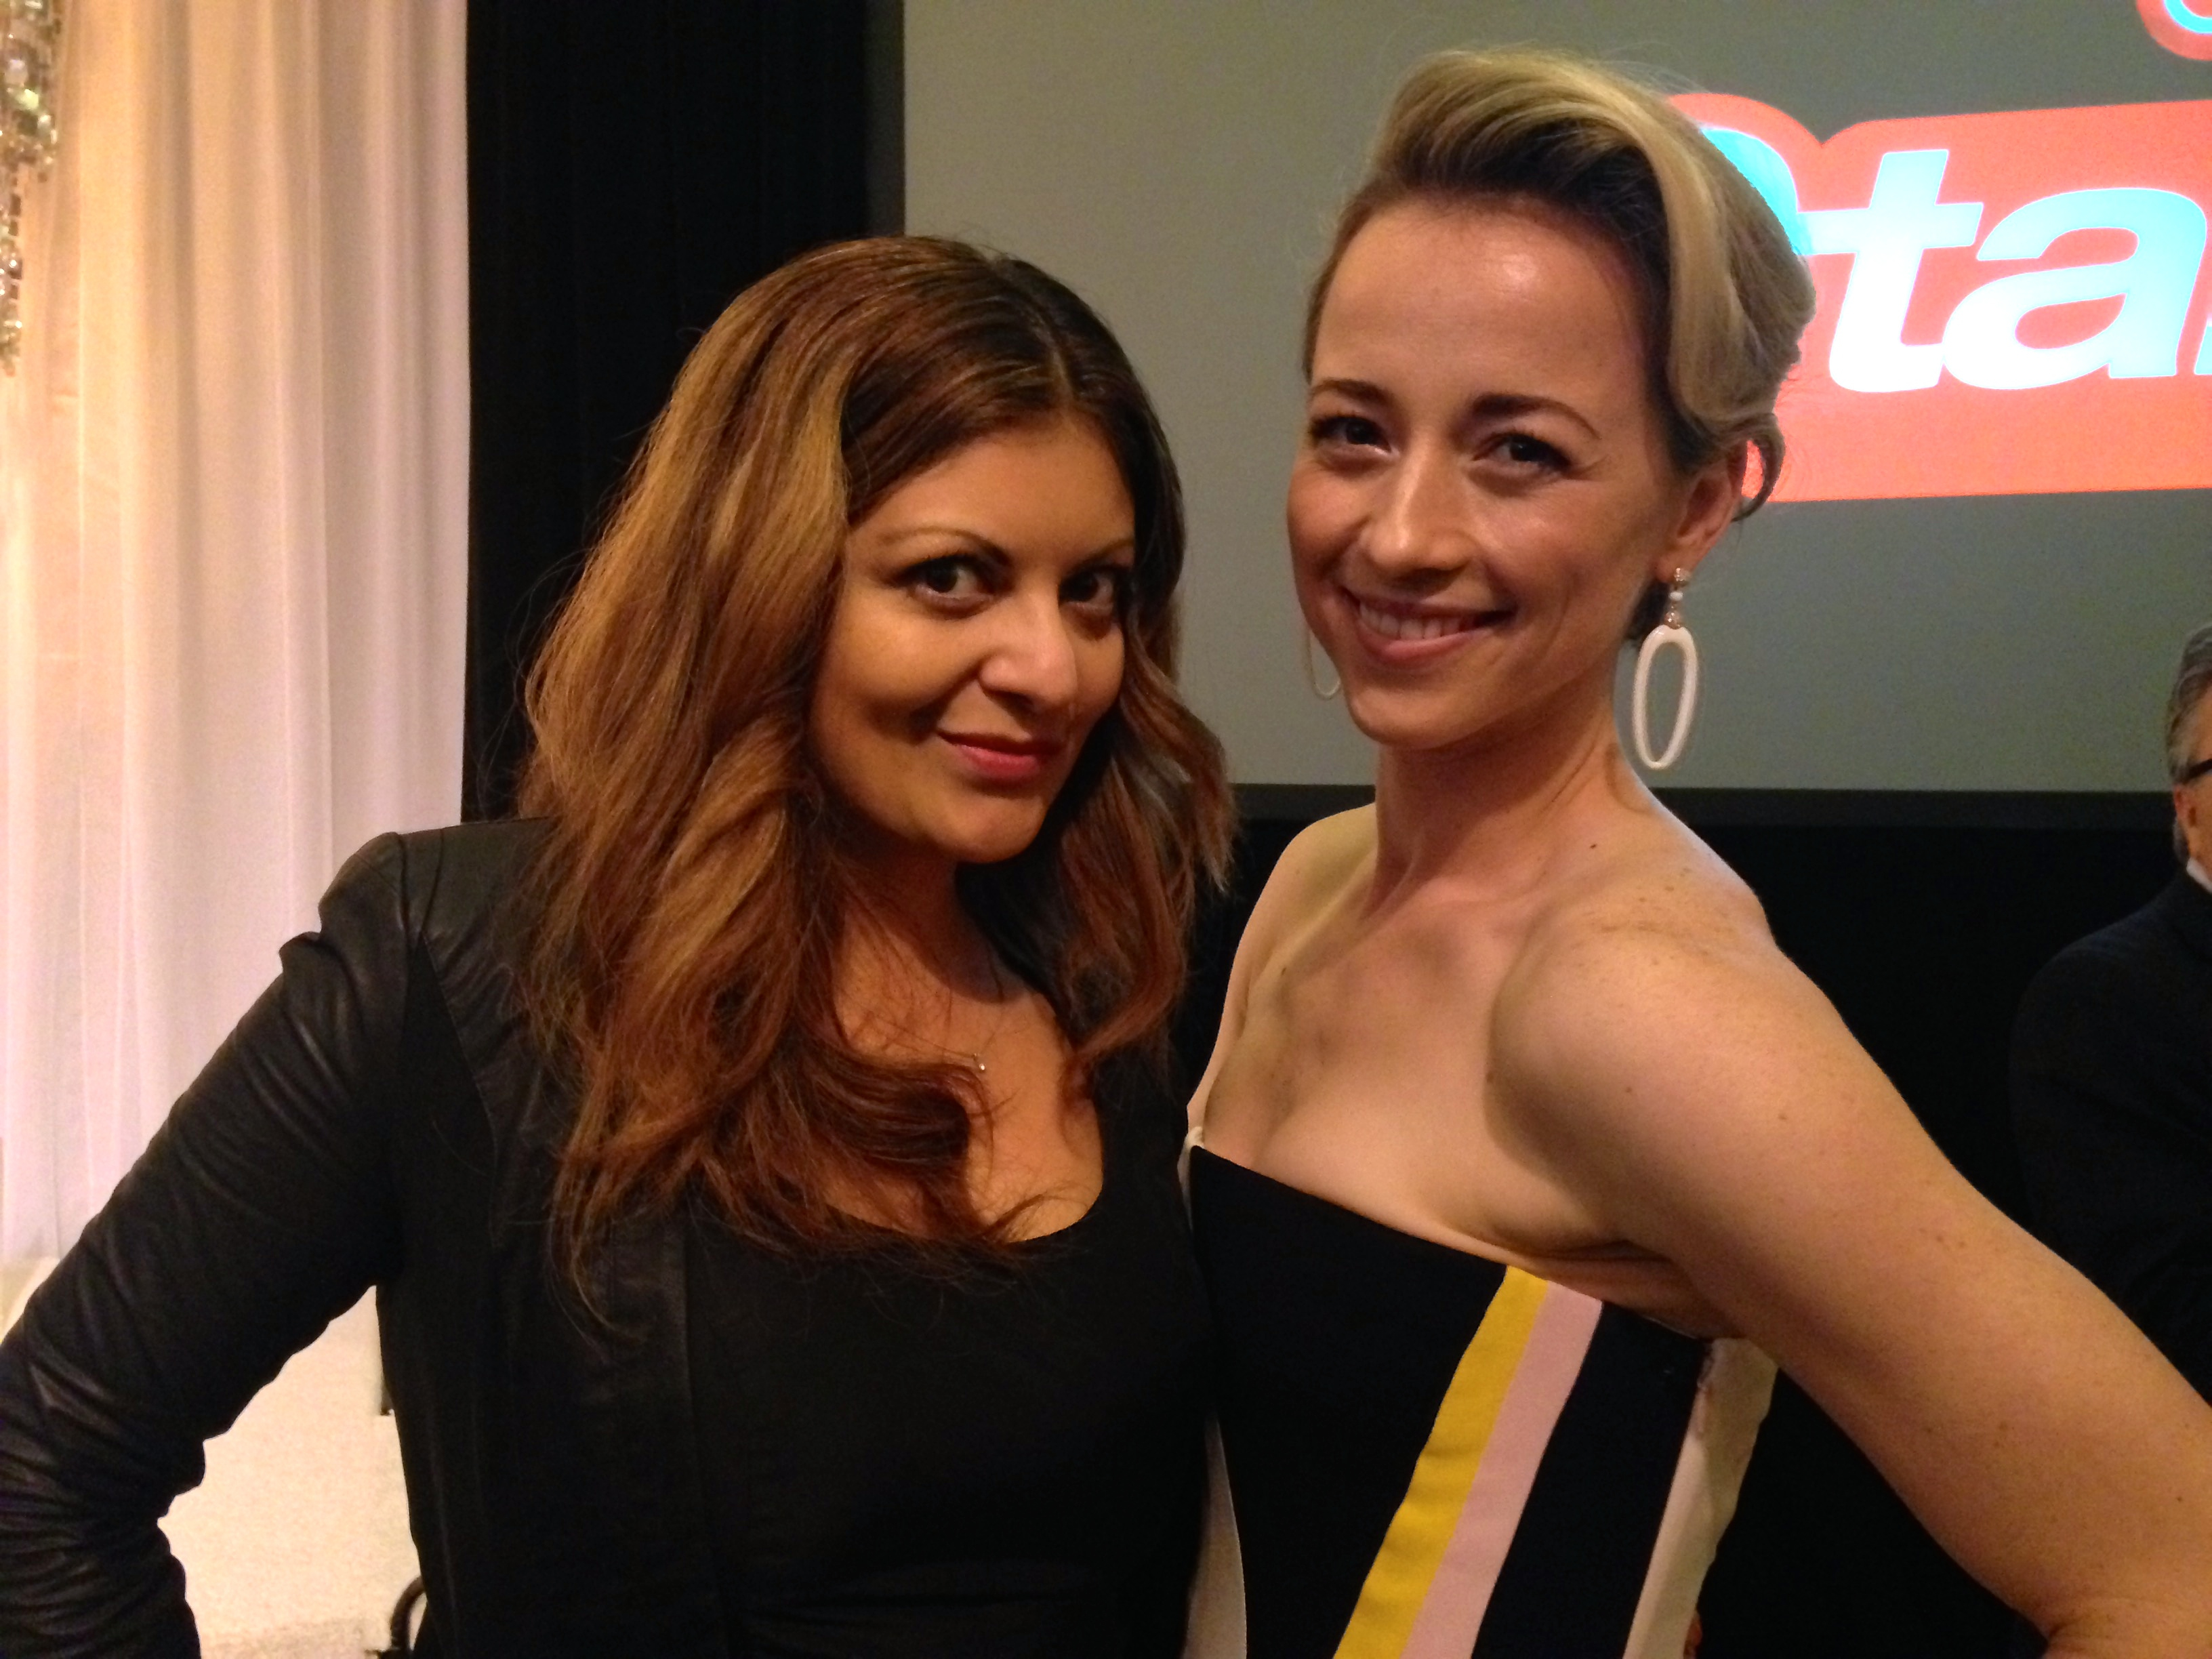 Patricia Chica (director) and Karine Vanasse (actress) at the Canadian Stars pre-Oscars party in Beverly Hills, CA